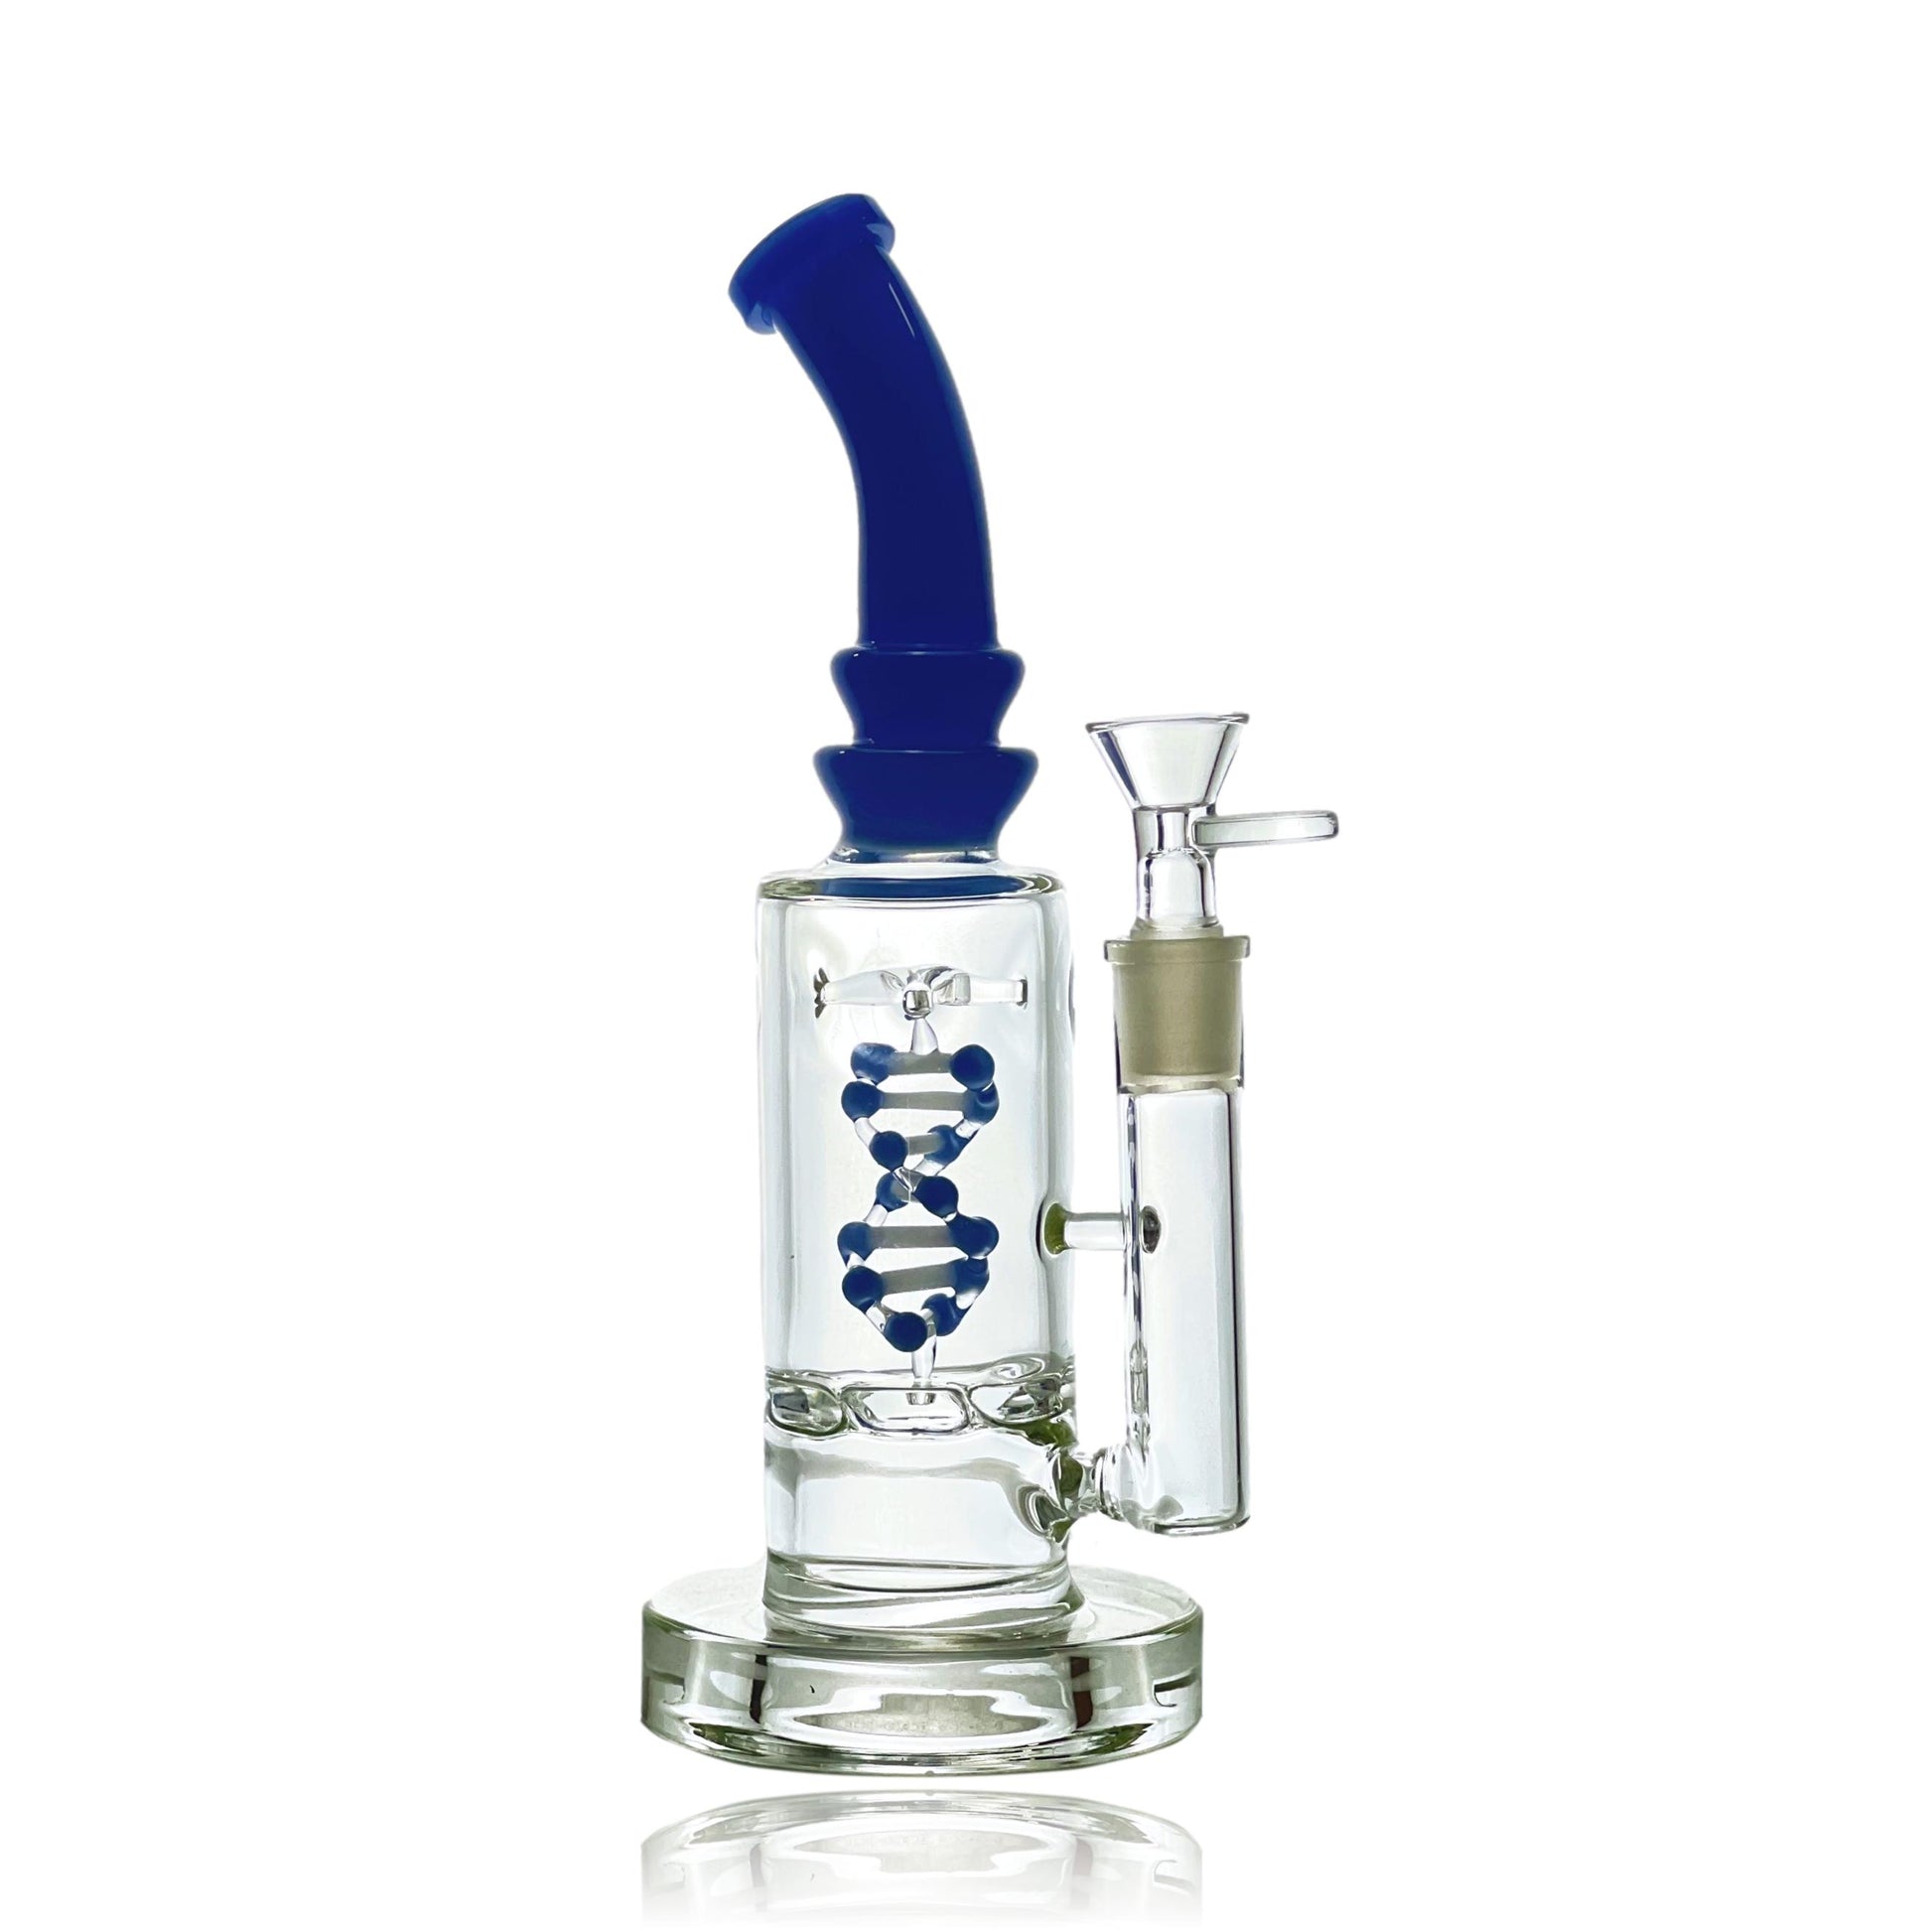 Introducing the 10" NEU Tornado DNA Rig Water Pipe – A Cyclone of Innovation in Every Hit